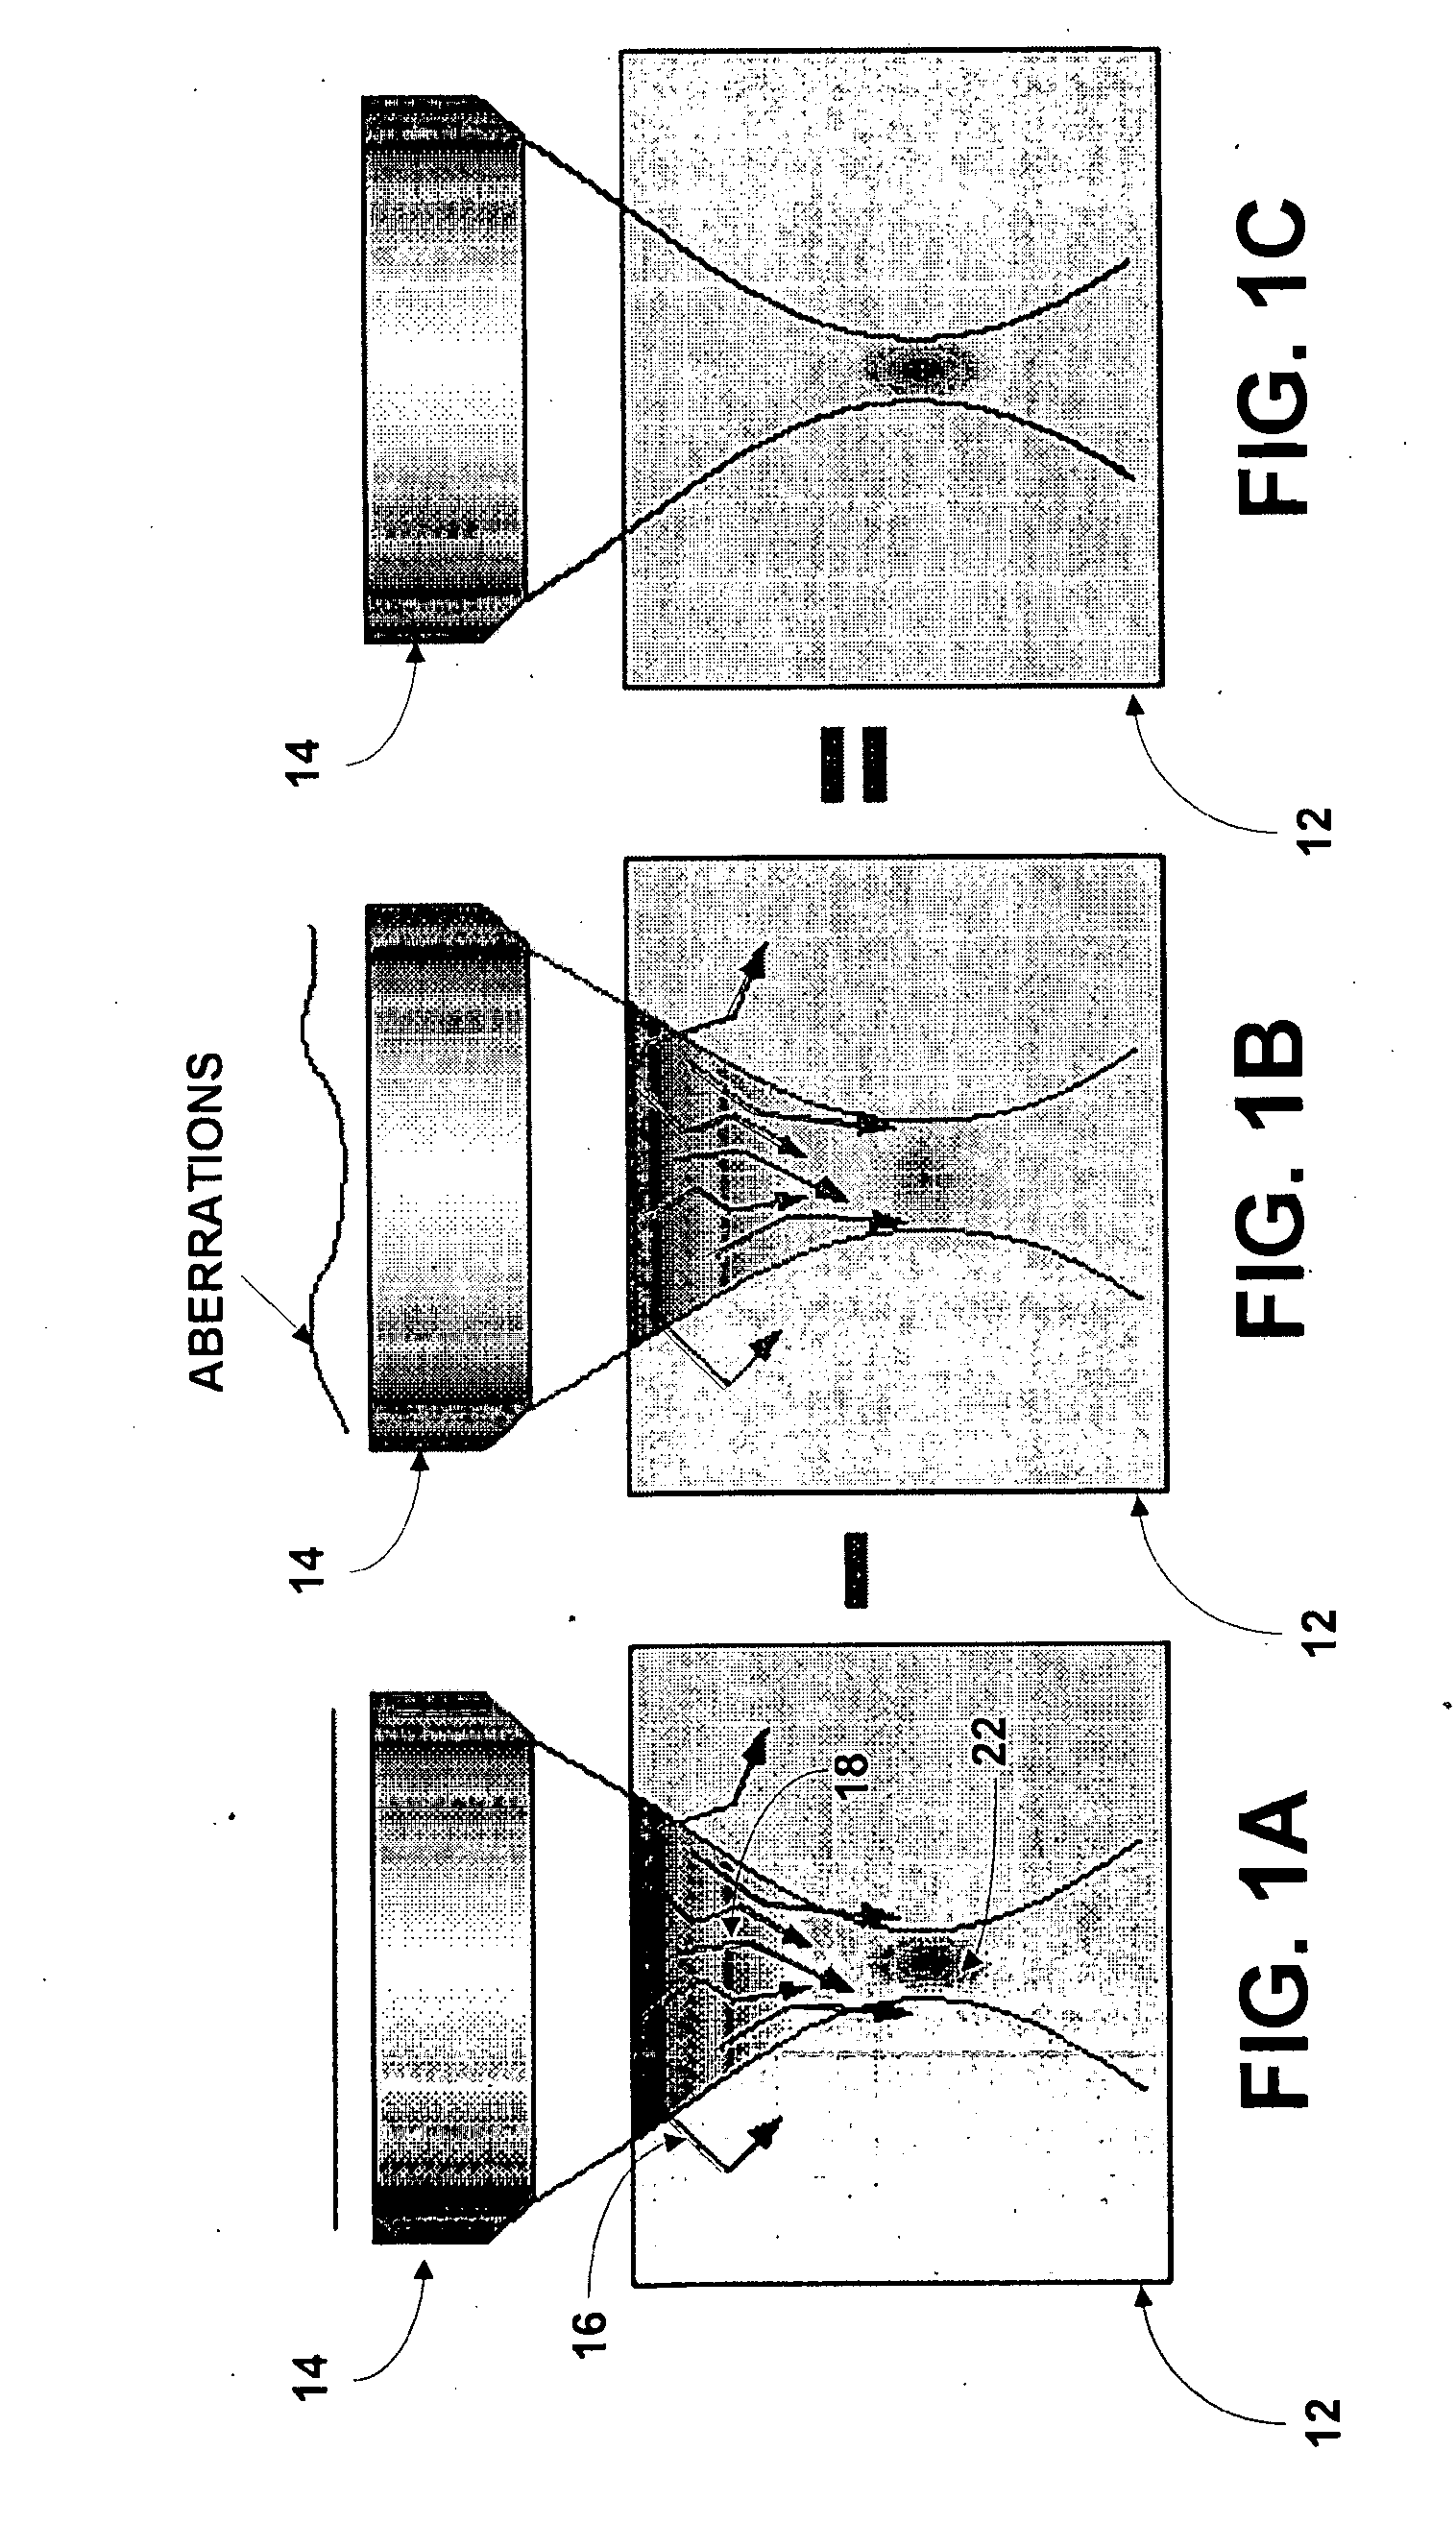 System and method for providing enhanced background rejection in thick tissue with differential-aberration two-photon microscopy